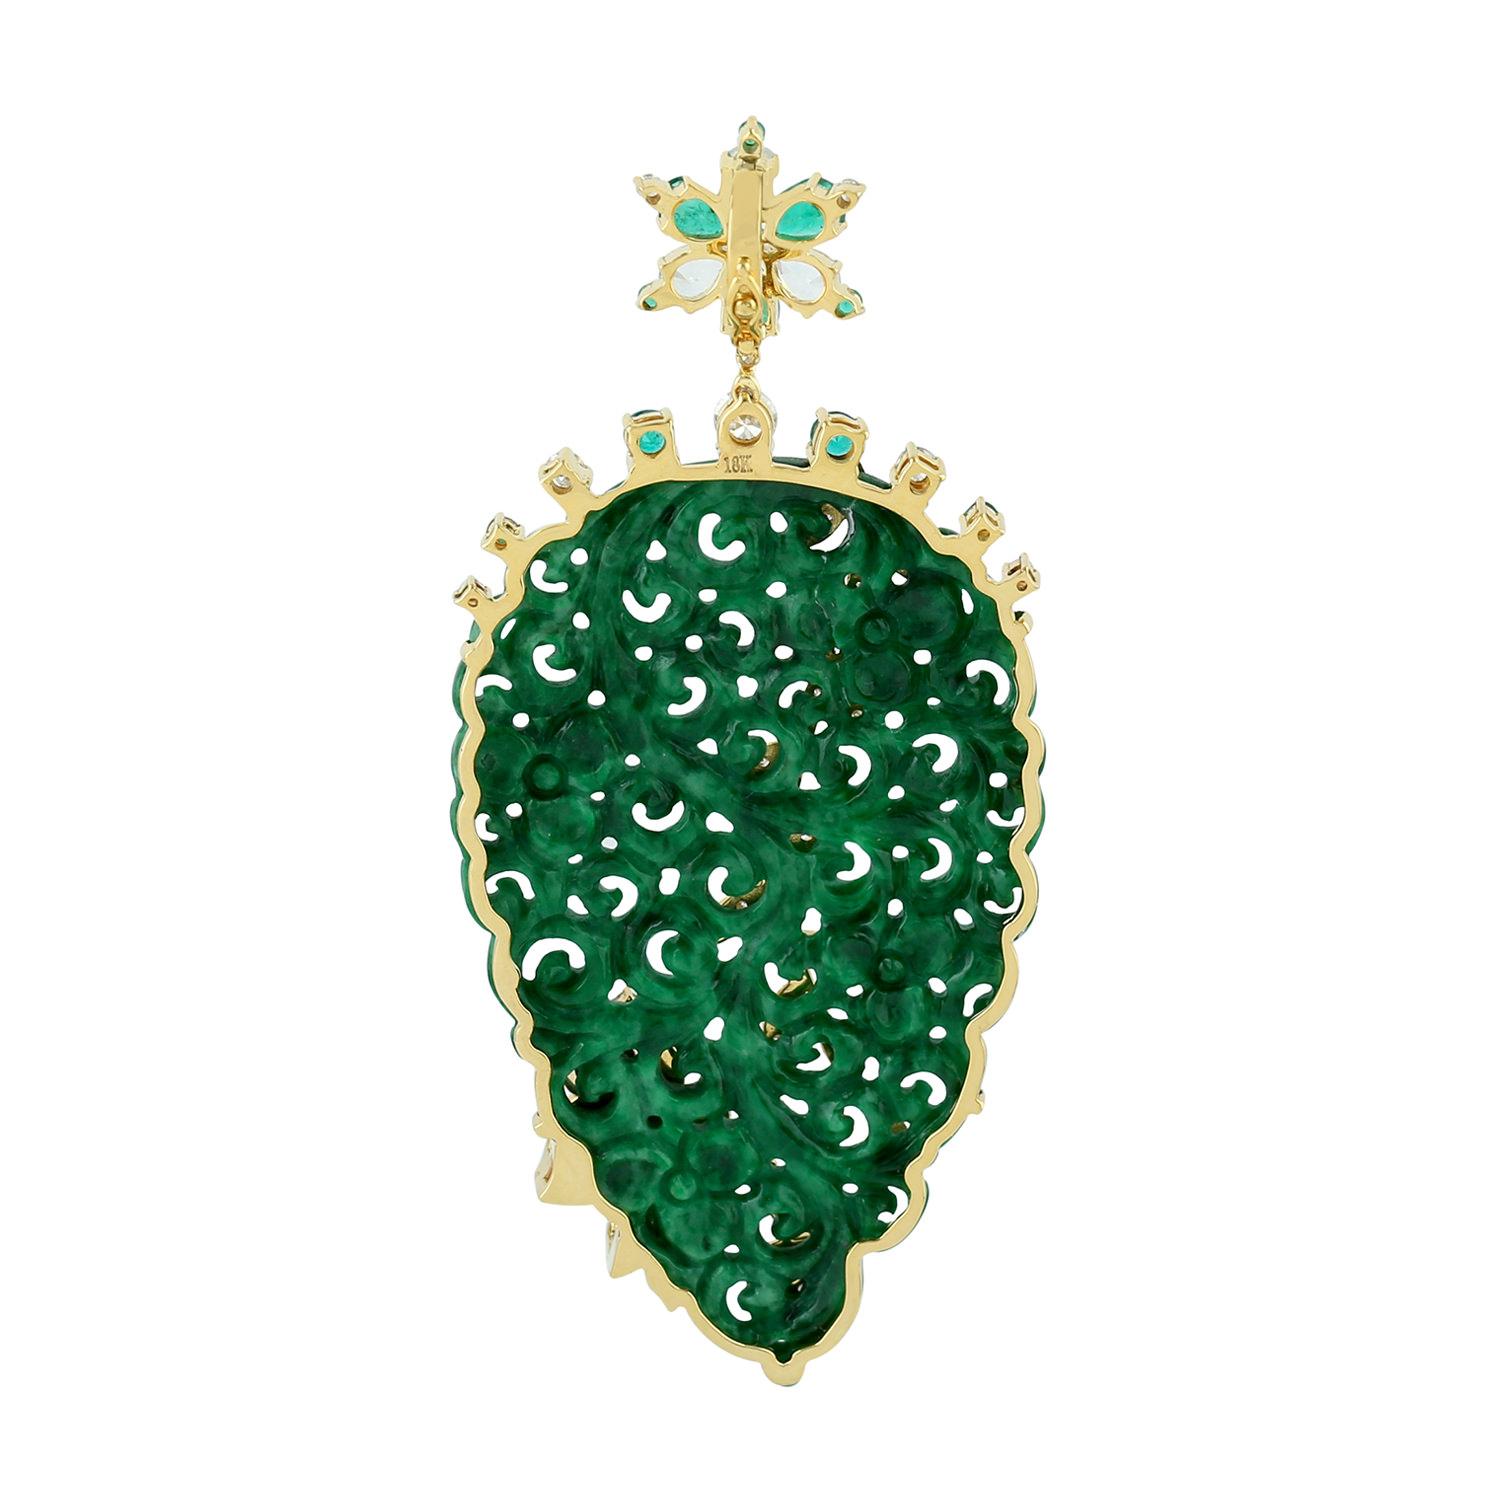 Cast in 18 Karat gold, this beautiful pendant features 23.33 carats of carved Jade, .64 carats emerald, .56 carats sapphire & .96 carats of sparkling diamonds.  

FOLLOW  MEGHNA JEWELS storefront to view the latest collection & exclusive pieces. 